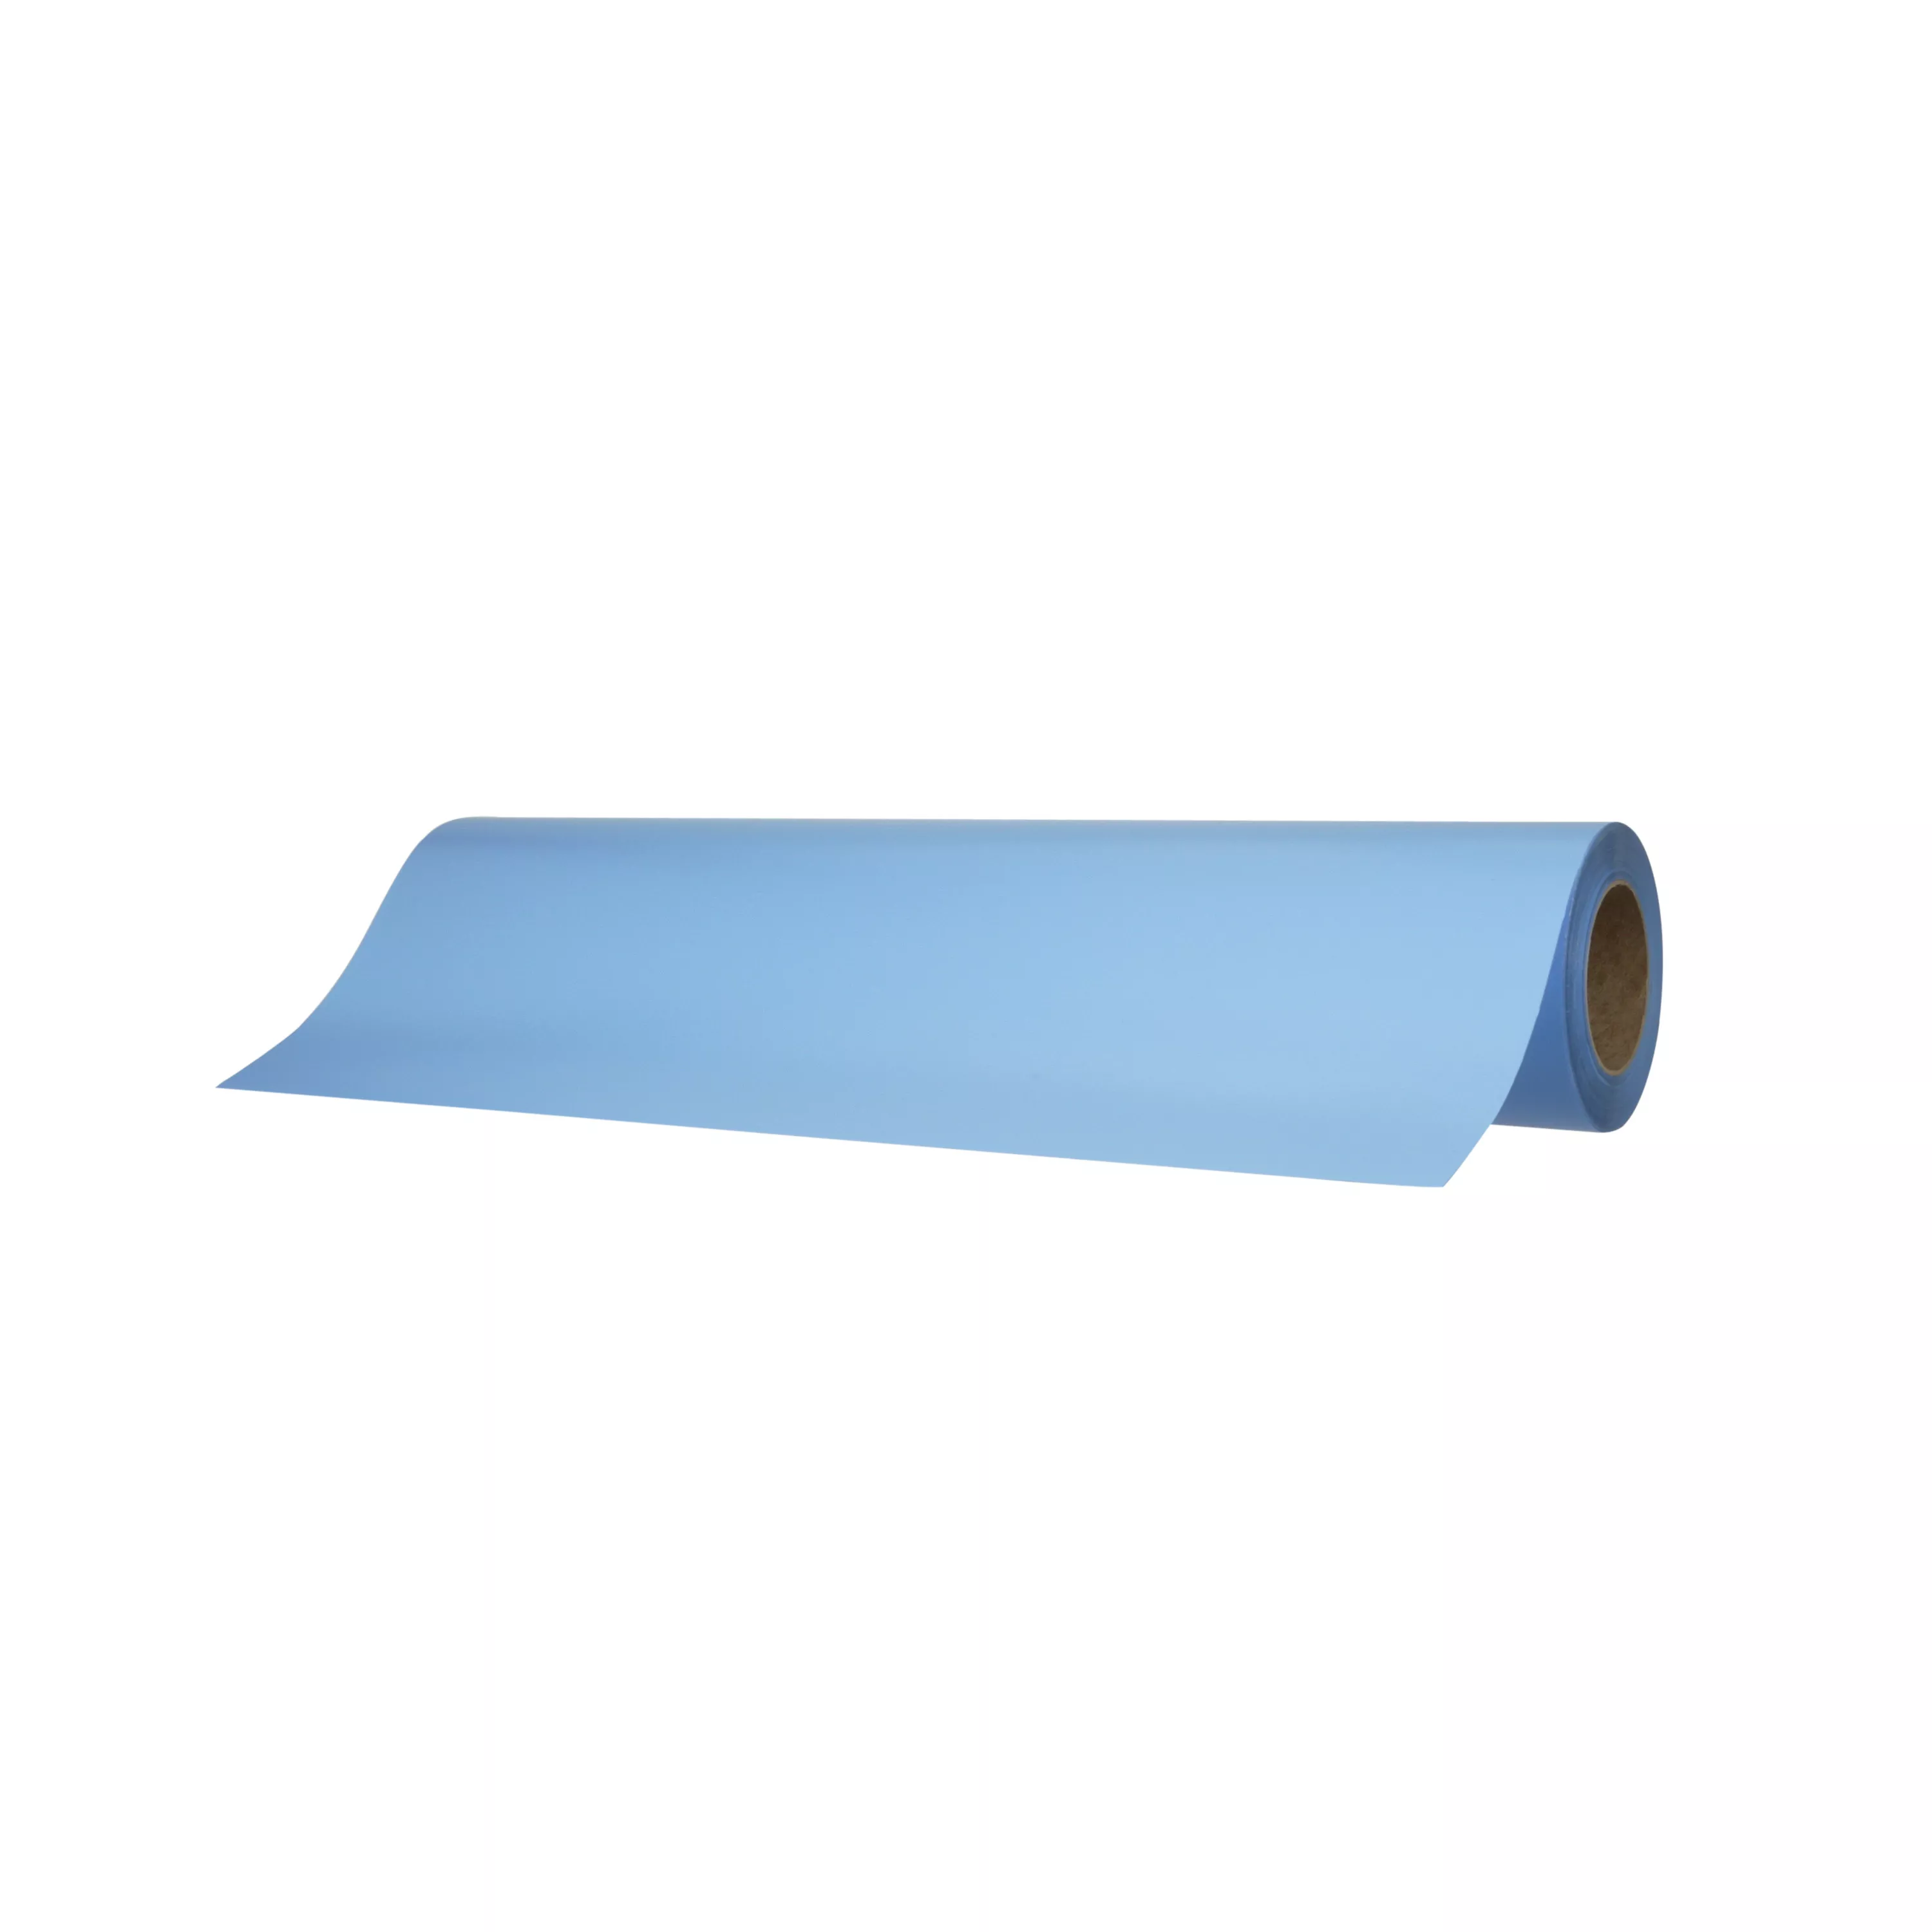 3M™ Scotchcal™ Translucent Graphic Film 3630-227, Azure, 48 in x 50 yd,
1 Roll/Case